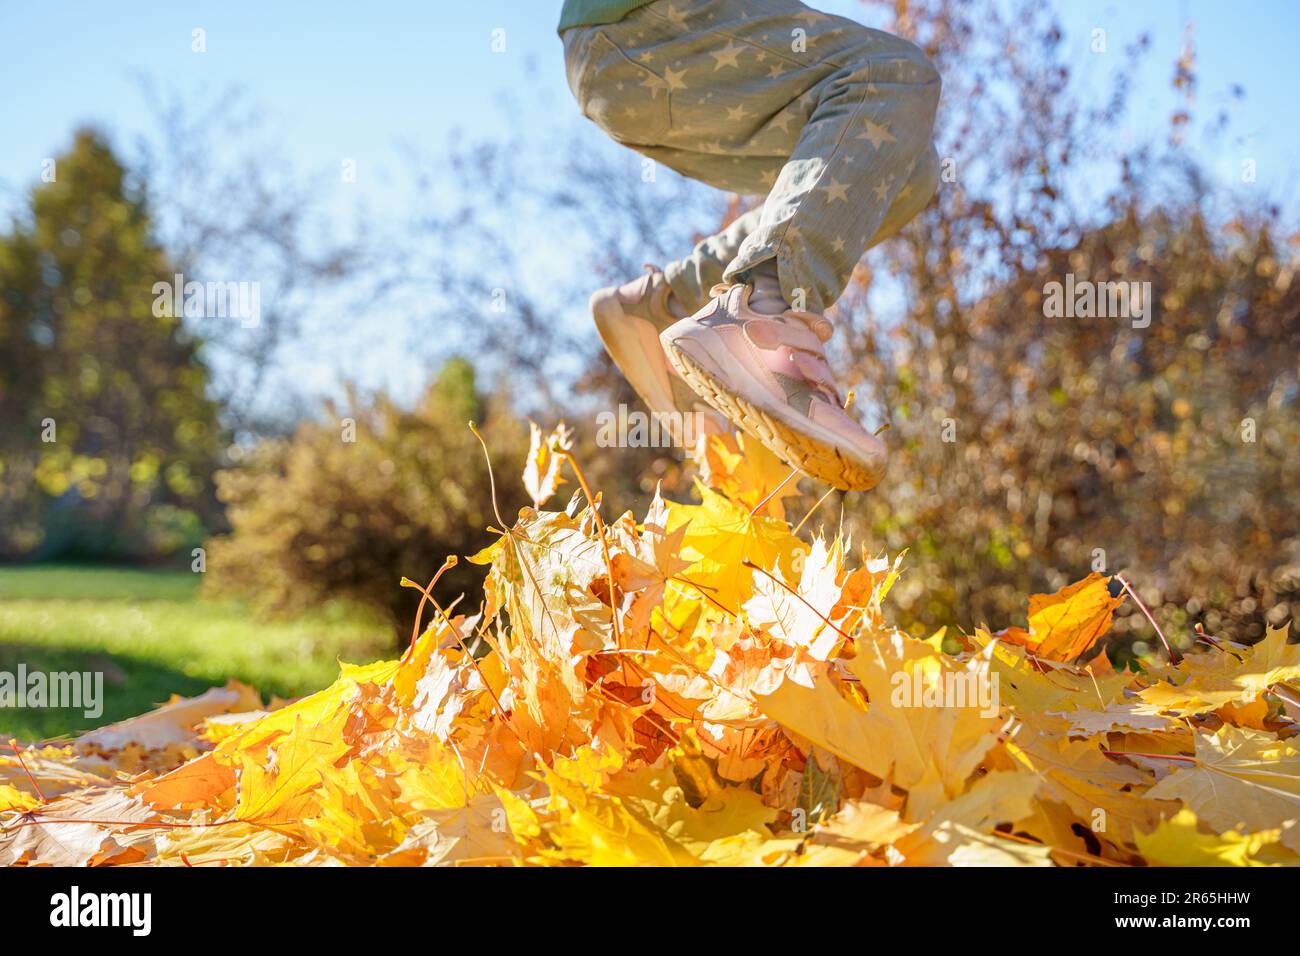 Girl kid jumping on trampoline with autumn leaves. Bright yellow orange maple foliage. Child walking, having fun, playing in fall backyard. Outdoor Stock Photo